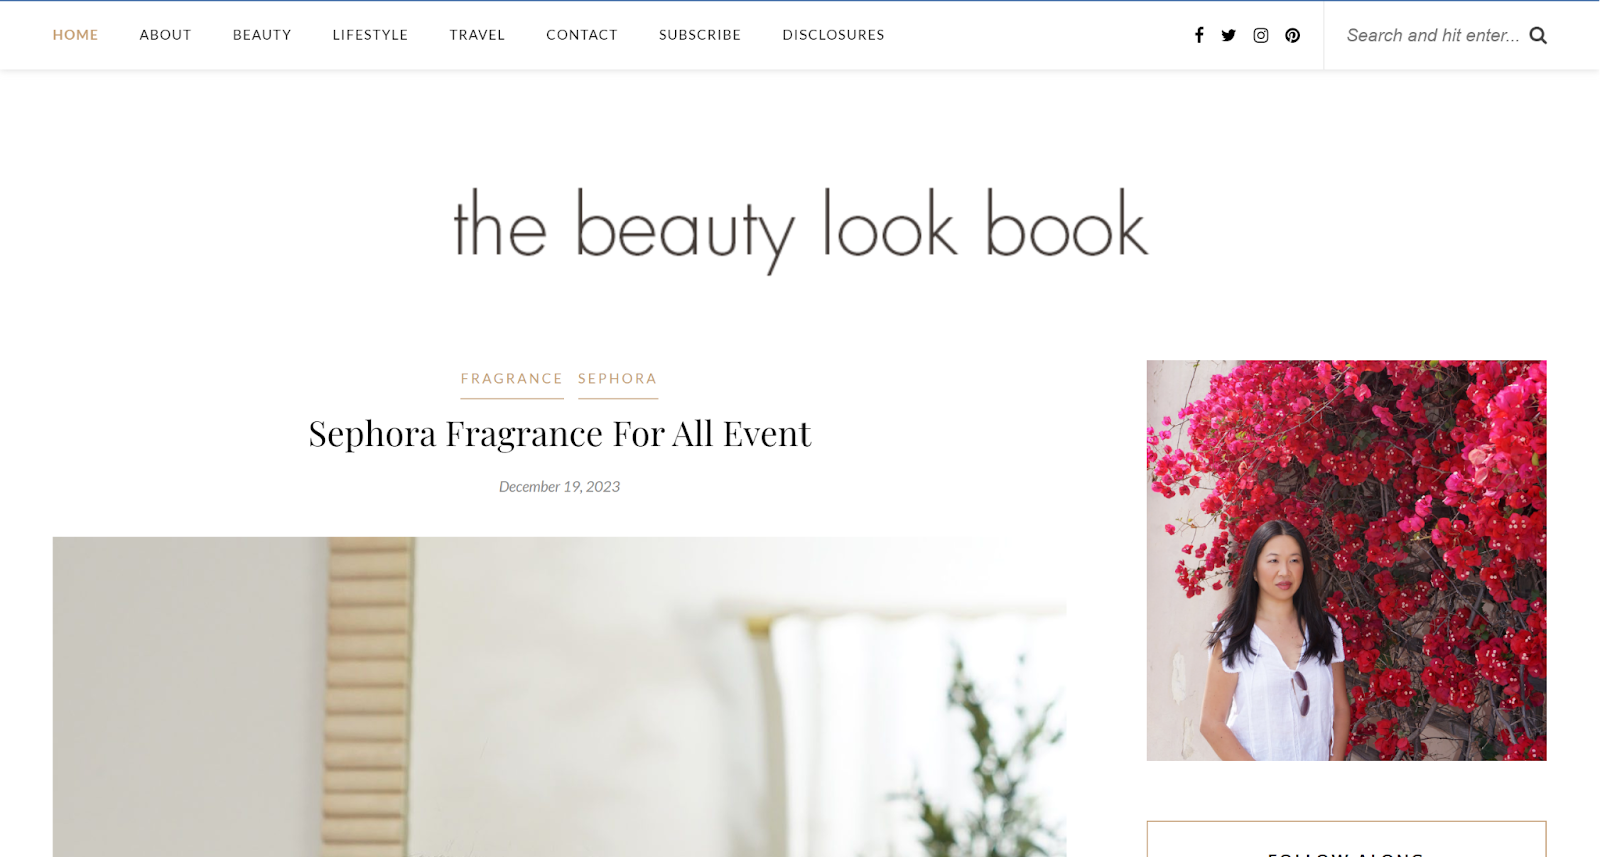 Sabrina started this blog to discuss beauty topics along with personal narratives.